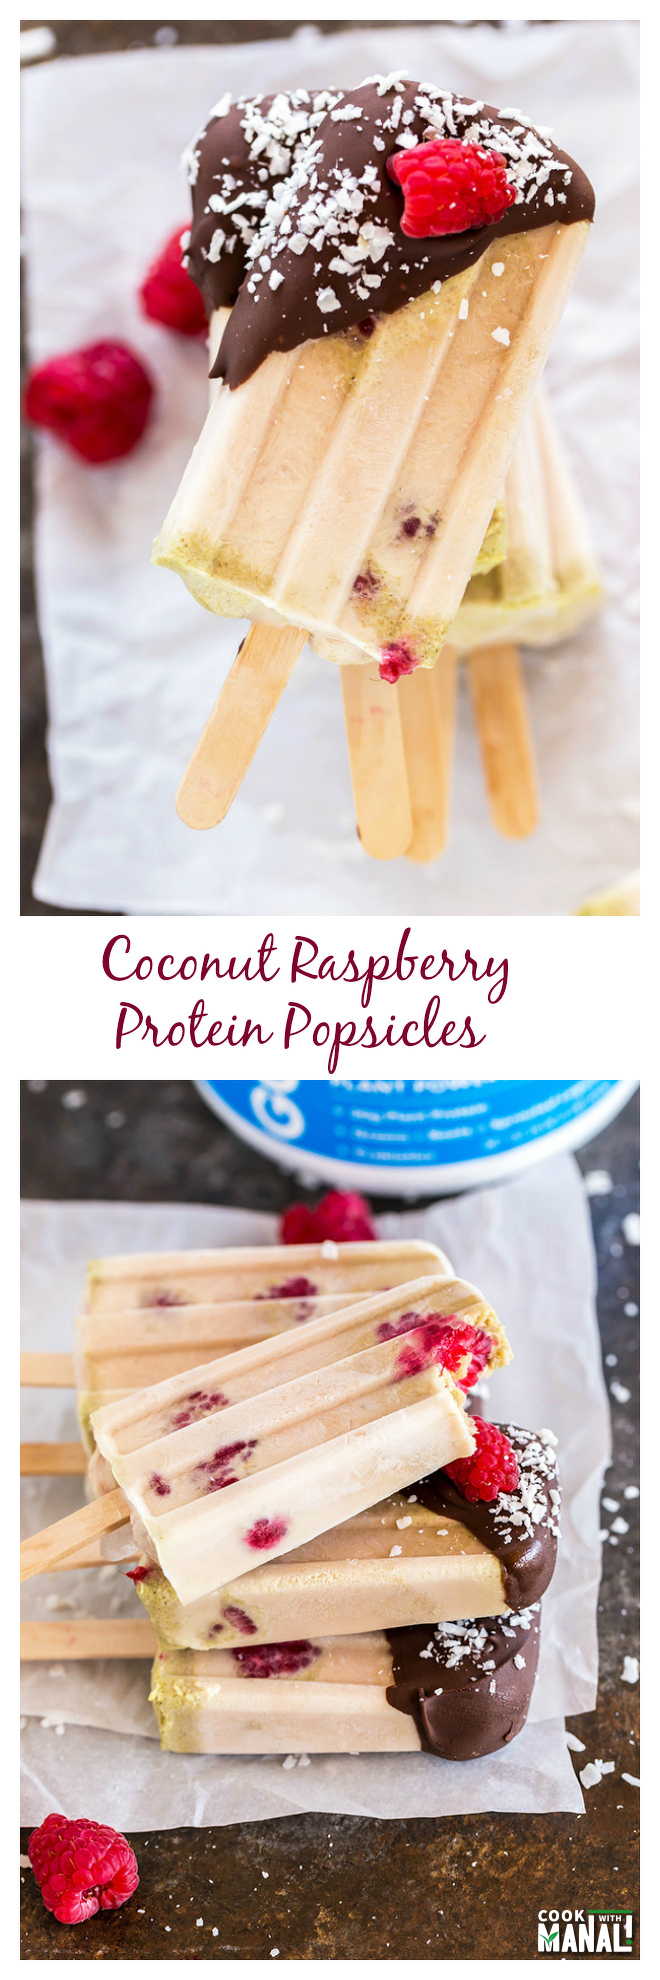 Coconut Raspberry Protein Popsicles-Collage